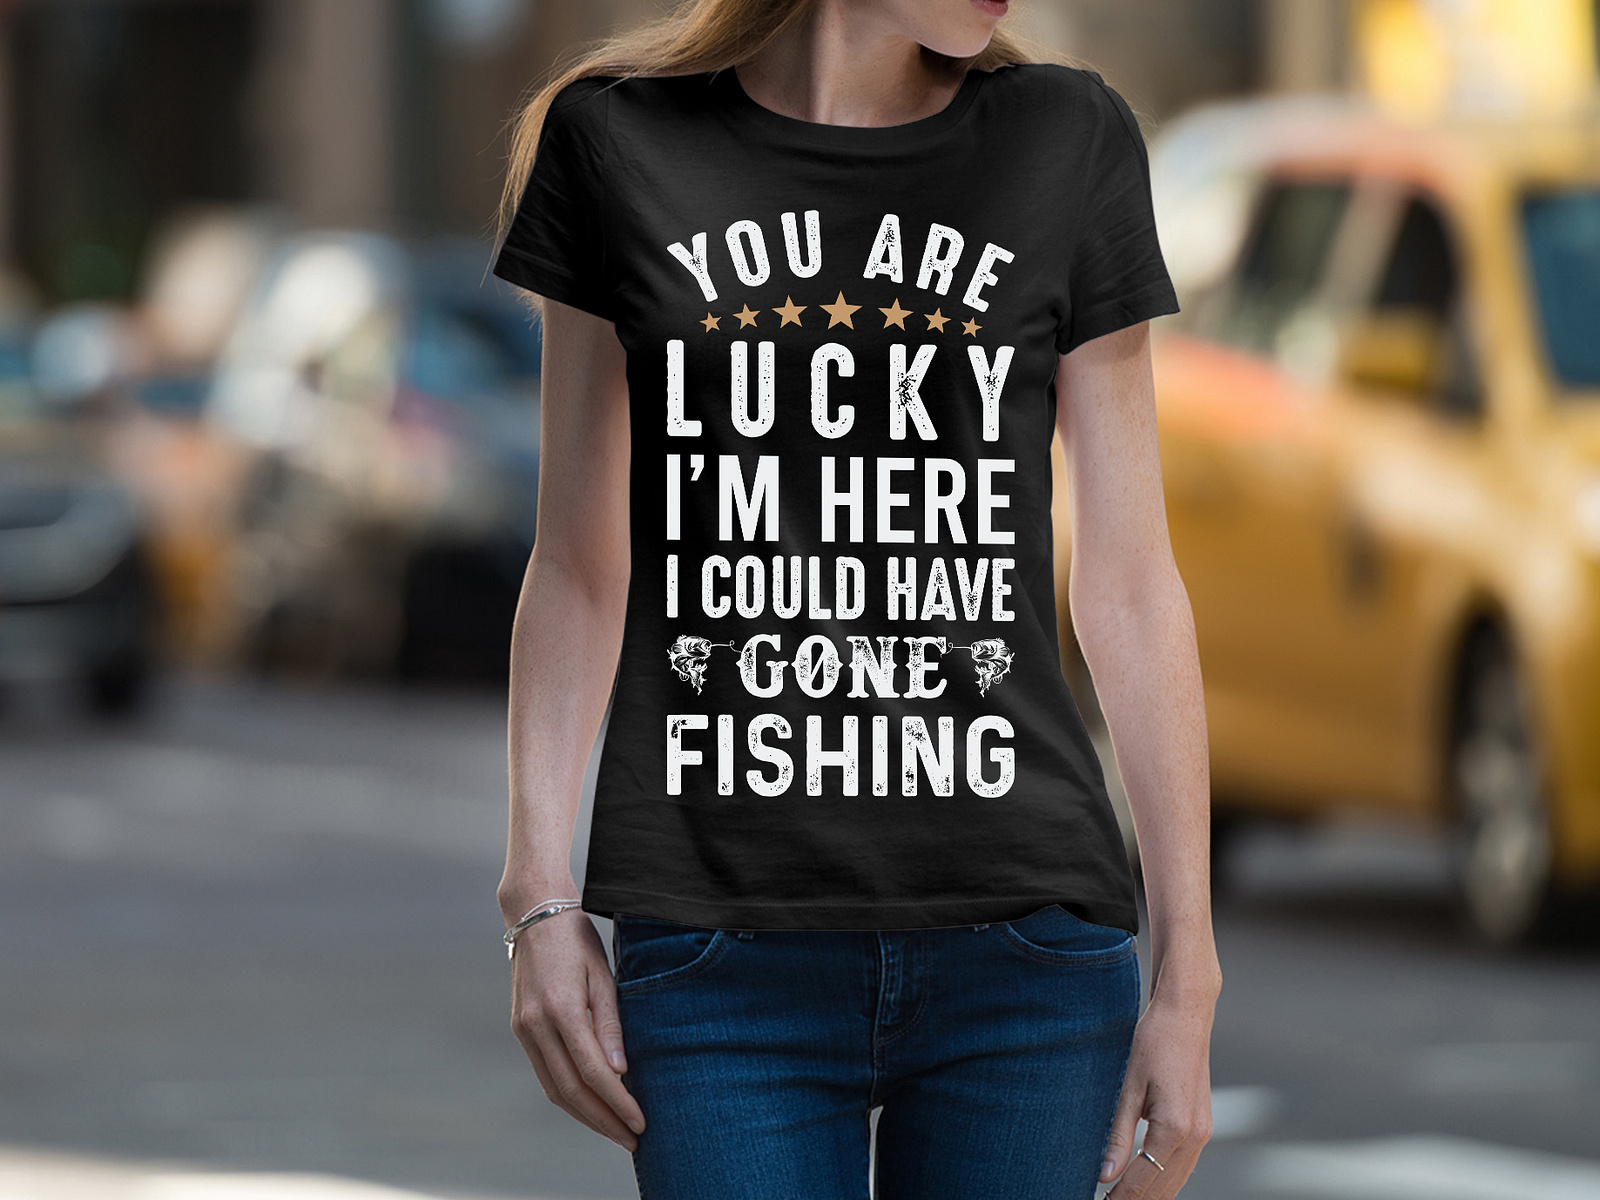 Fishing T-Shirt You're Lucky I'm Here I Could Have Gone Fishing by Masud  Rana on Dribbble